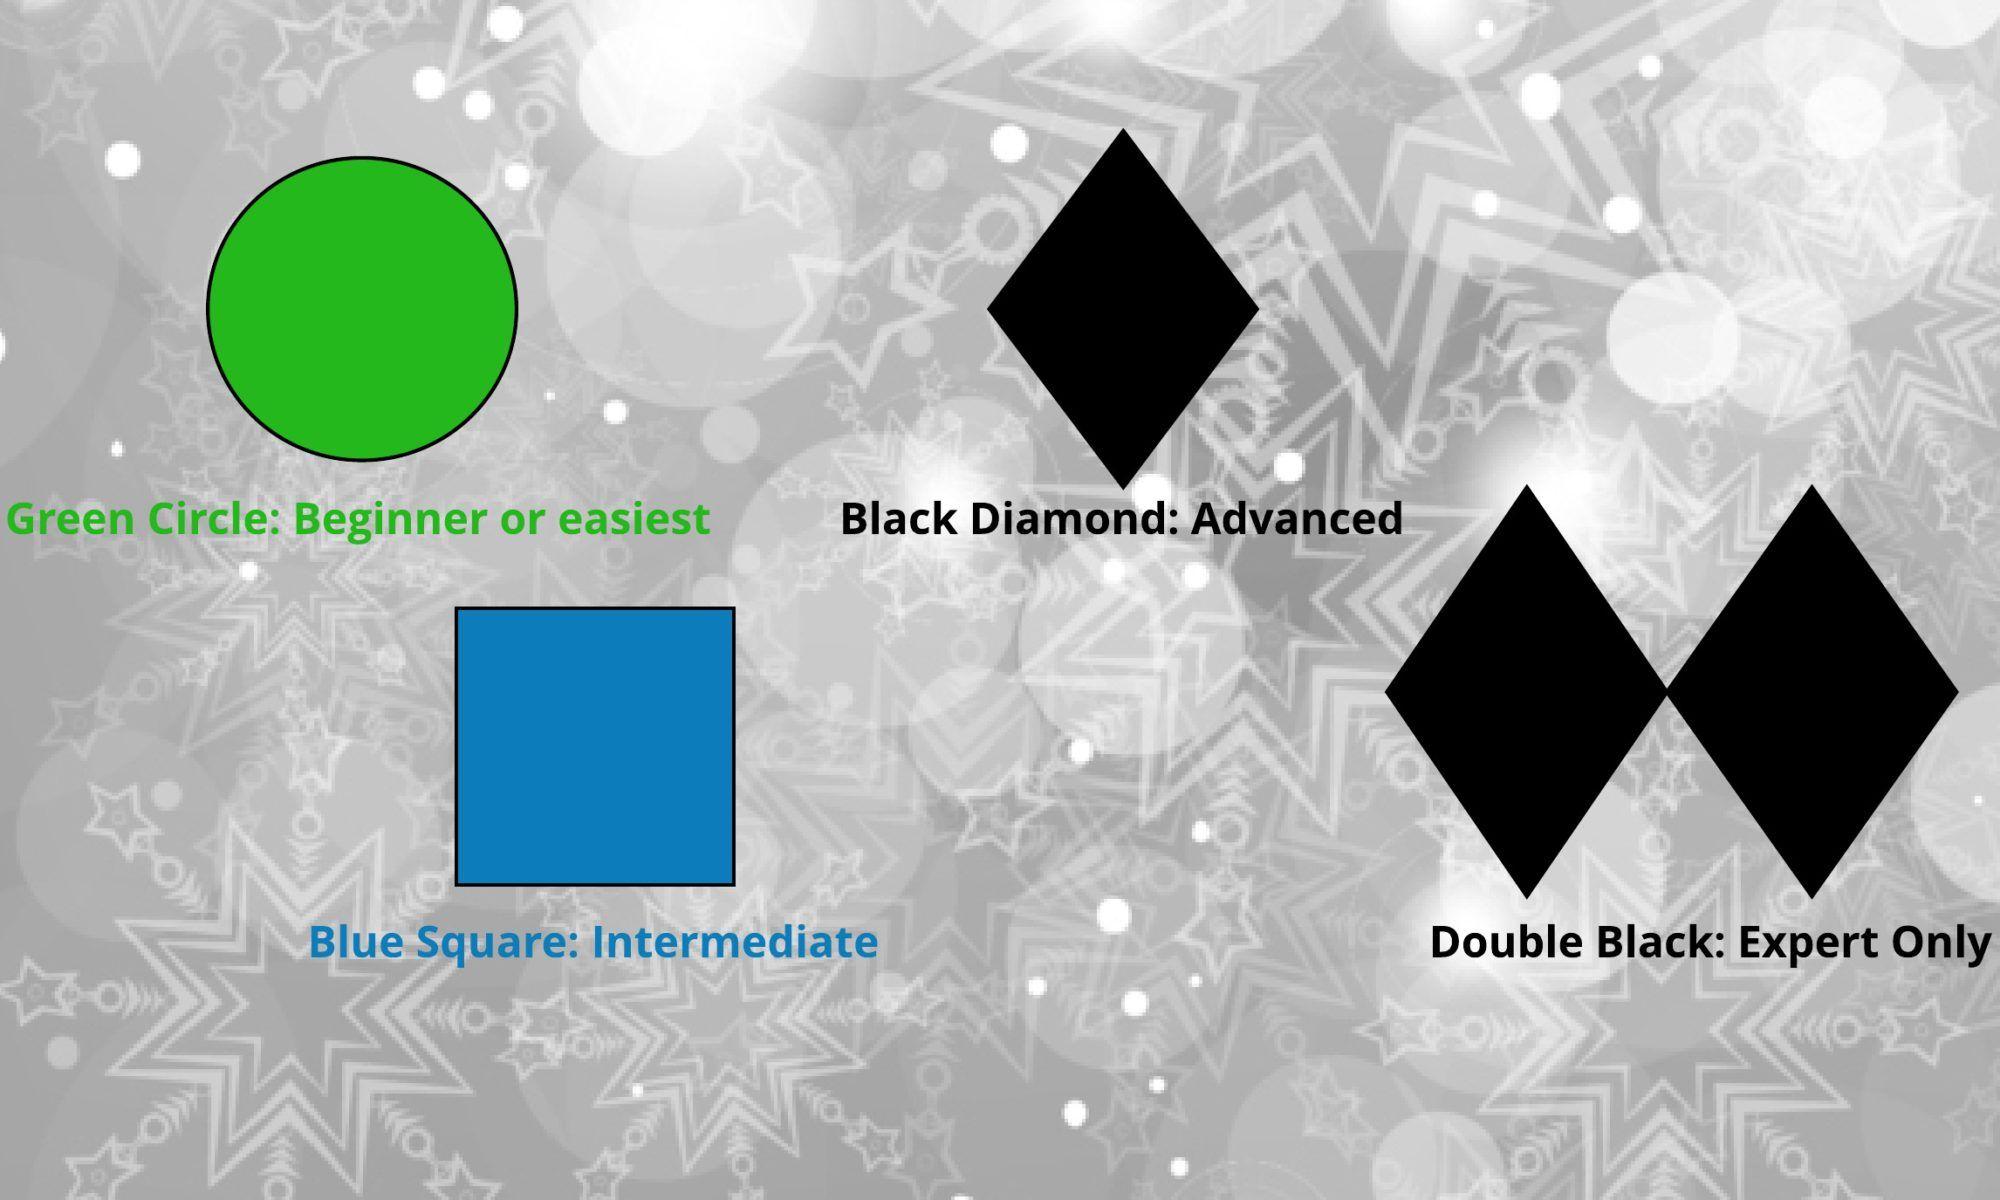 Double Black Diamond Logo - How We Review Local Vail Businesses- Using Ski Run Classifications